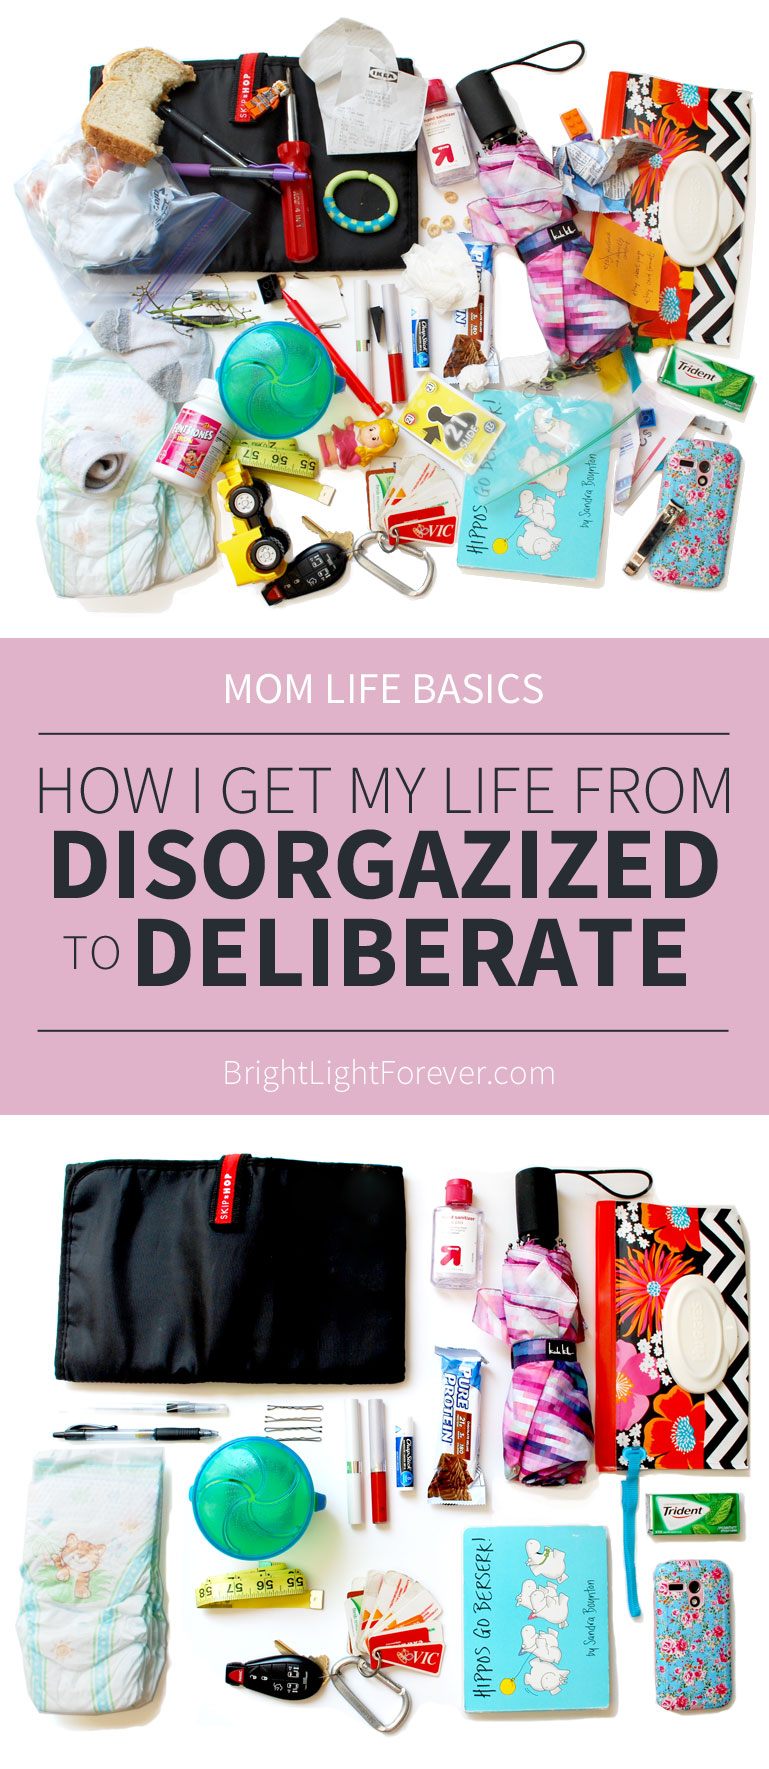 Mom Life Basics | How to get your life from disorganized to deliberate in just 2 steps